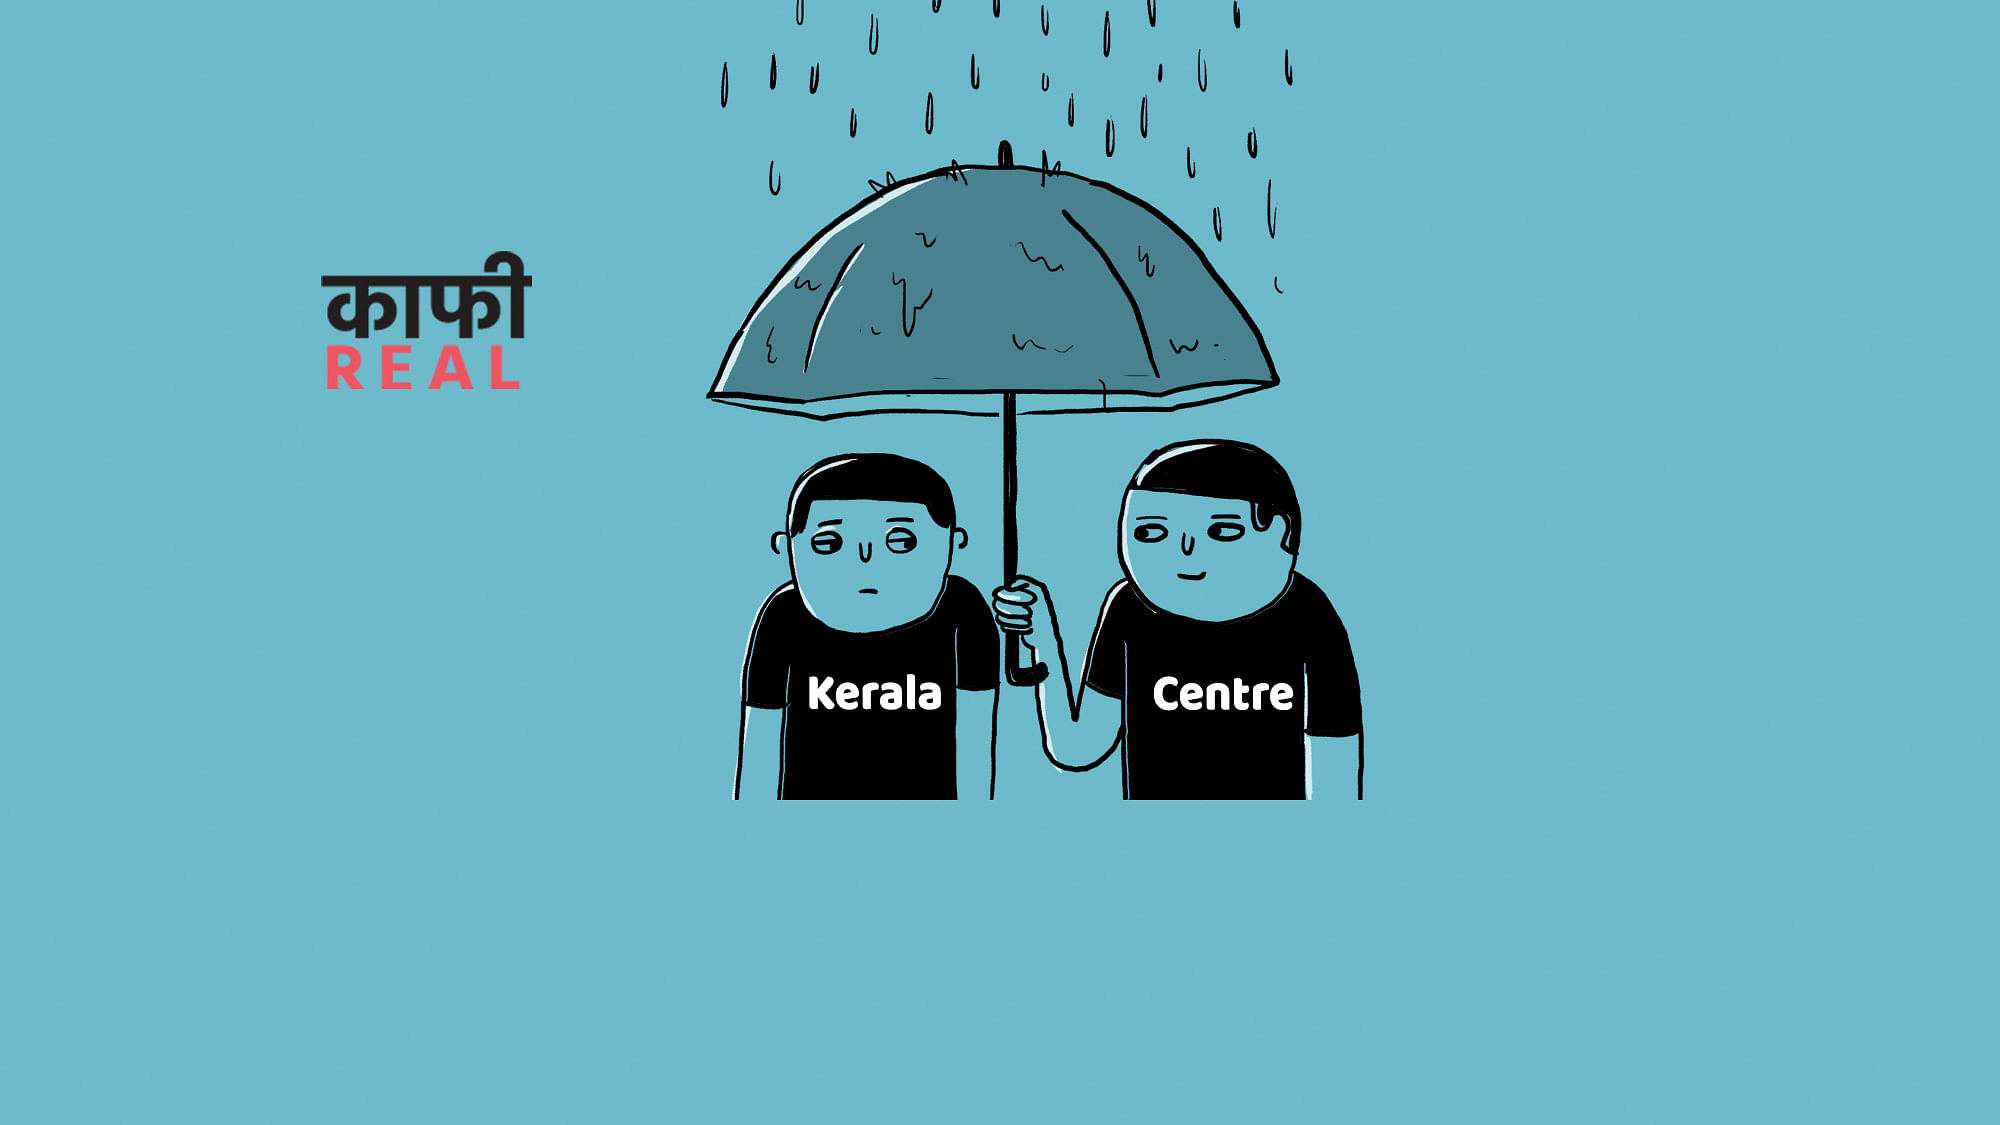 Kerala says “We need help”, Centre says “No, you don’t.”